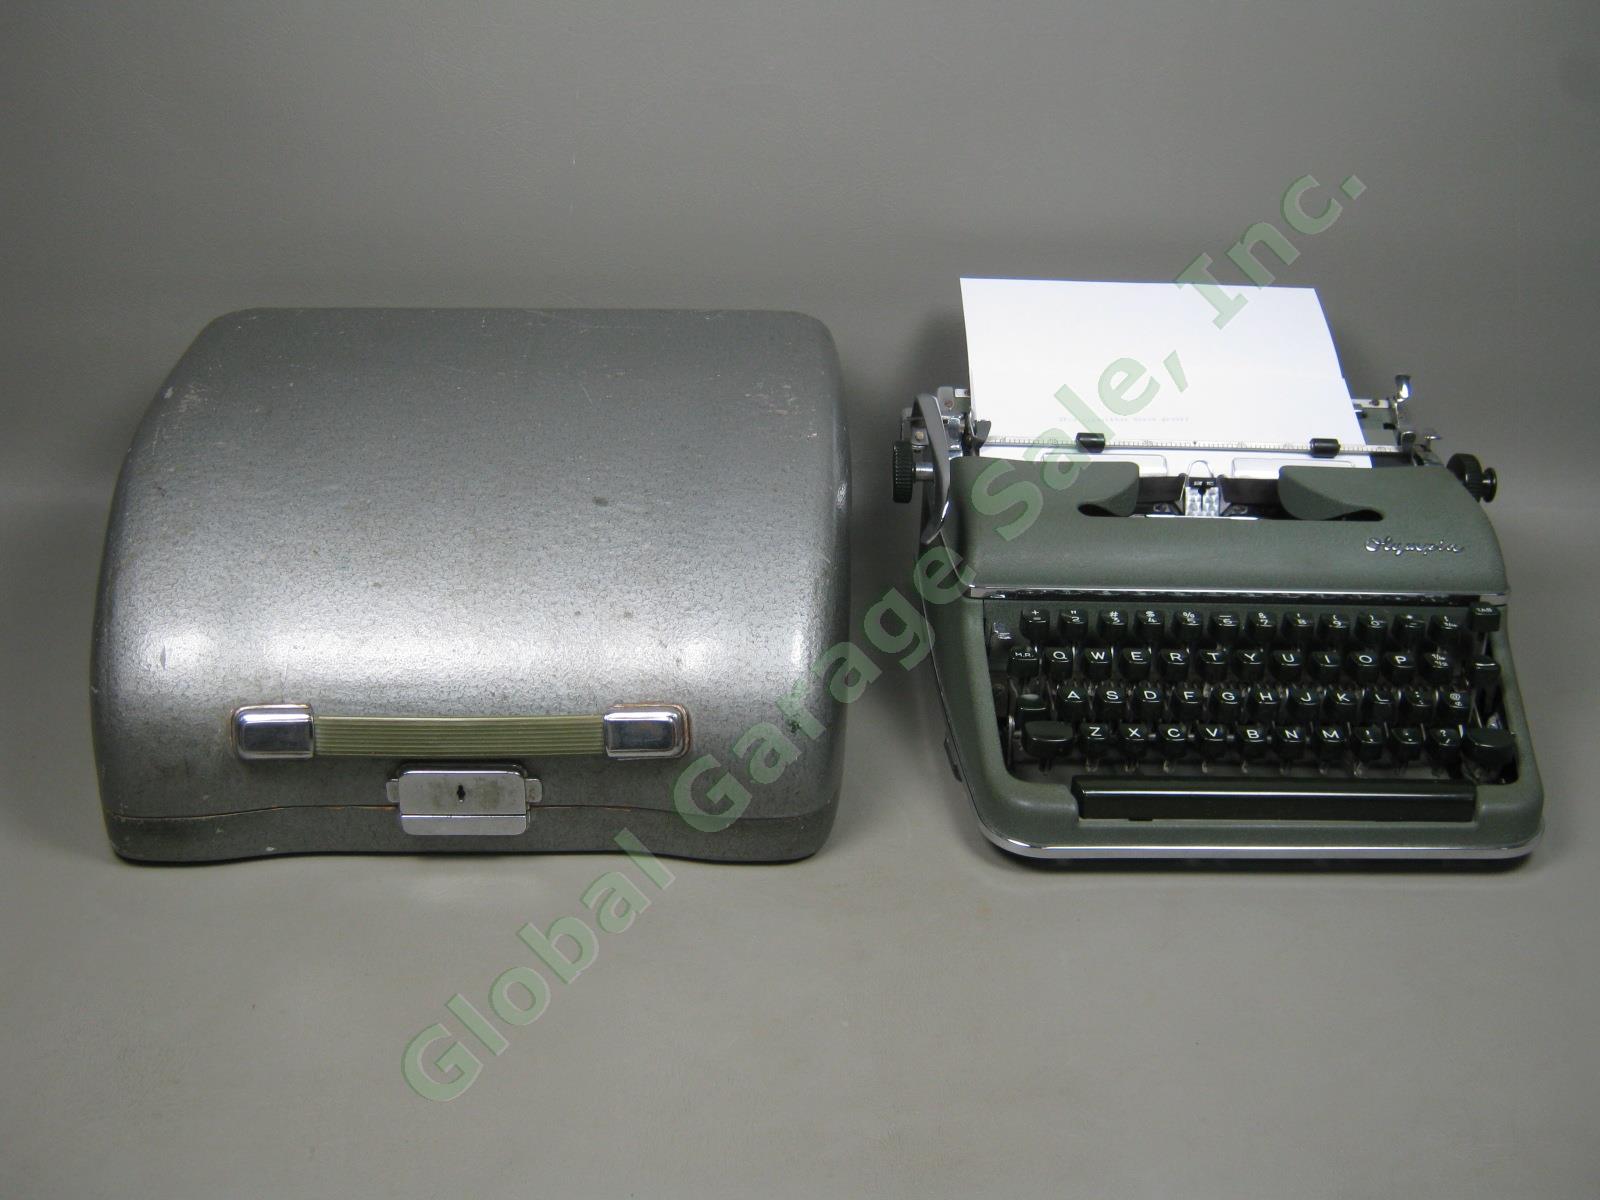 Vtg Green Olympia Werke Deluxe Typewriter With Metal Case Works! NO RESERVE!